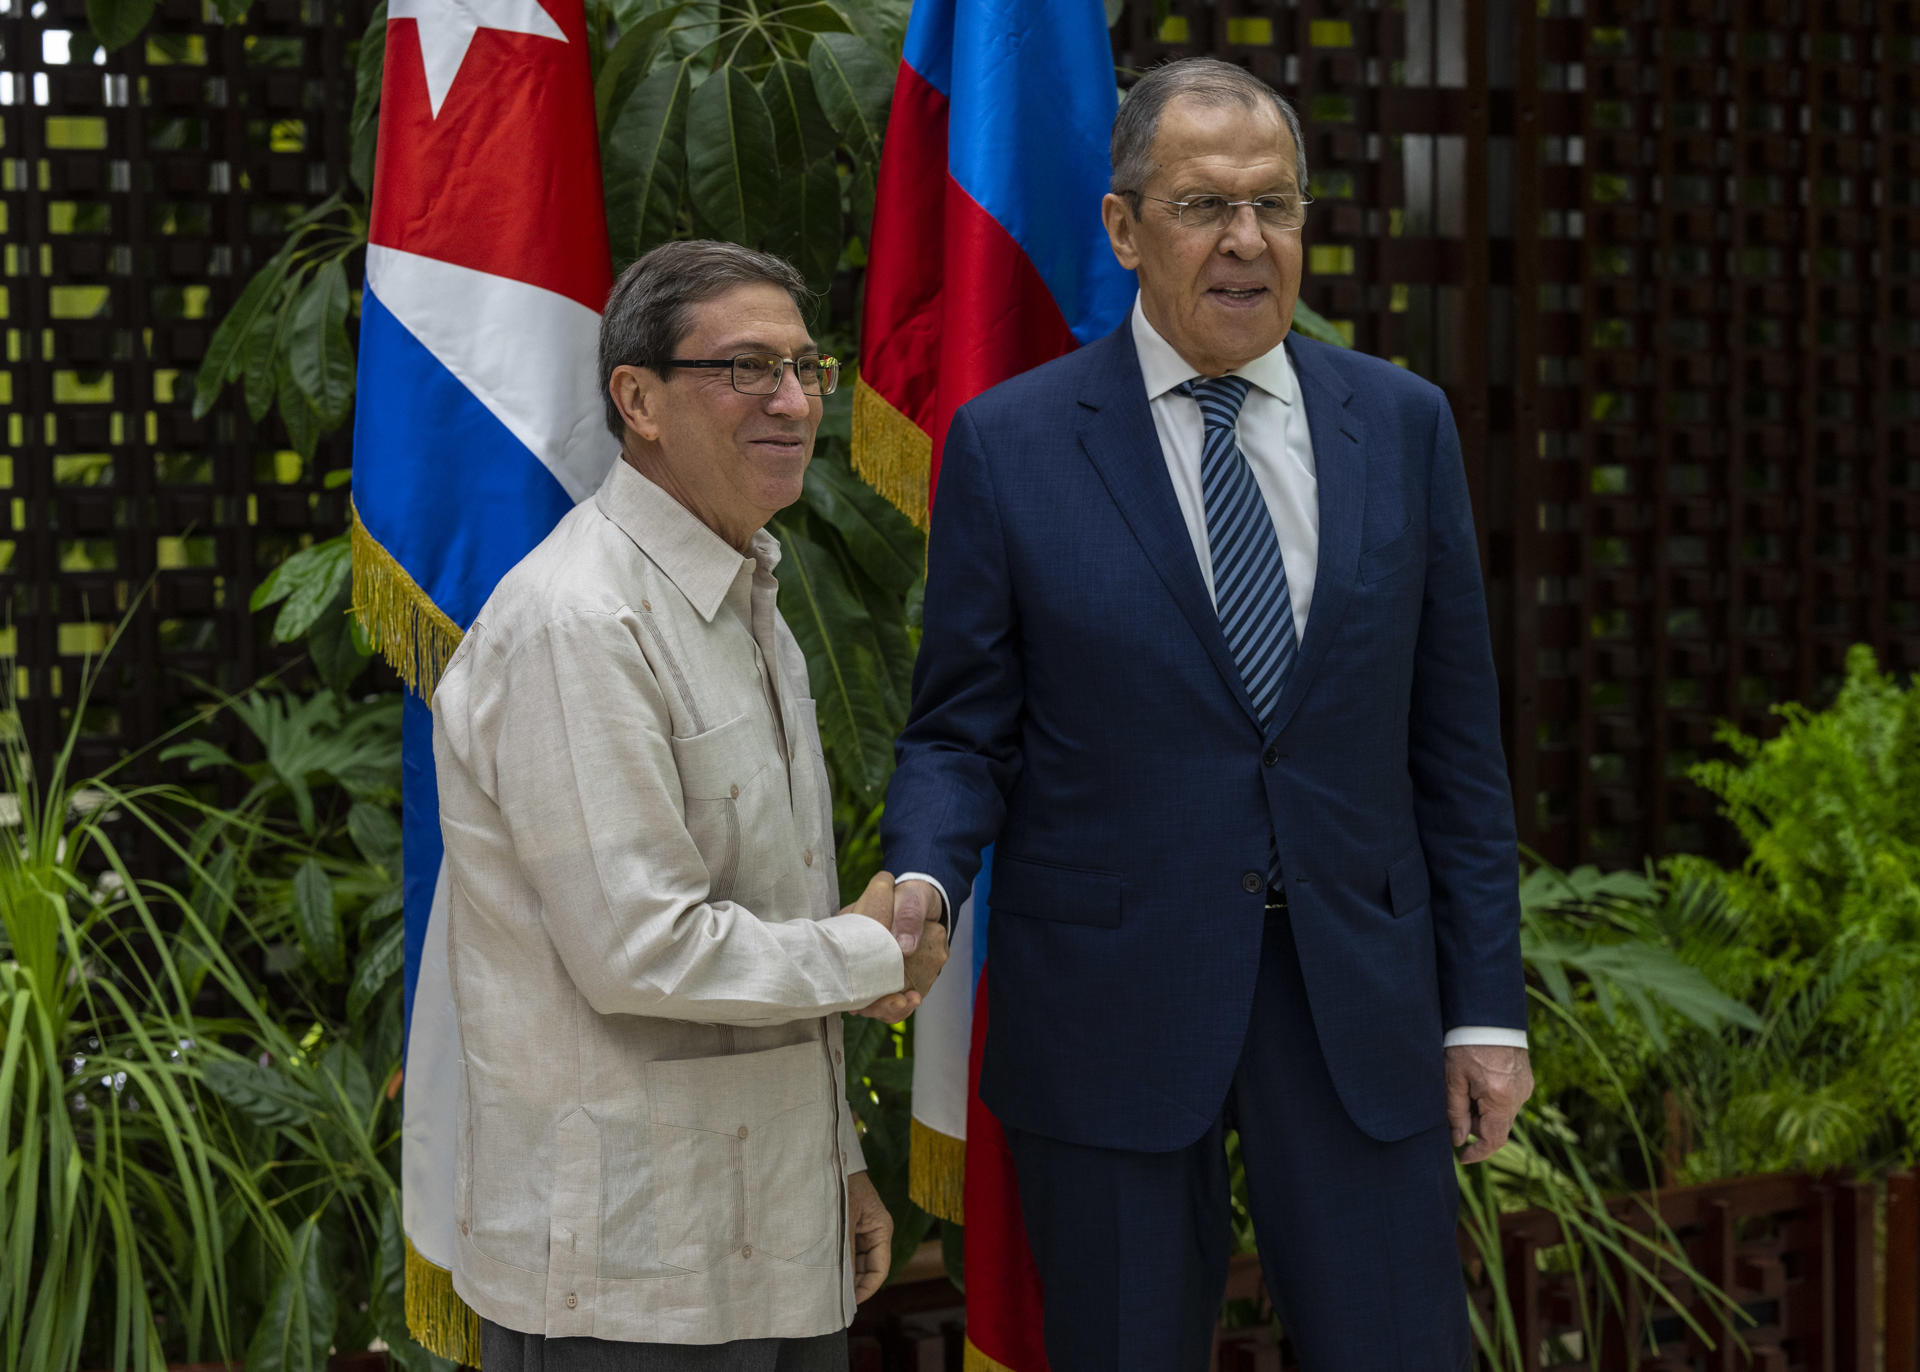 Cuban Foreign Minister Bruno Rodriguez (L) welcomes Russian counterpart Sergei Lavrov in Havana on 20 April 2023. EFE/Ramón Espinosa/Pool